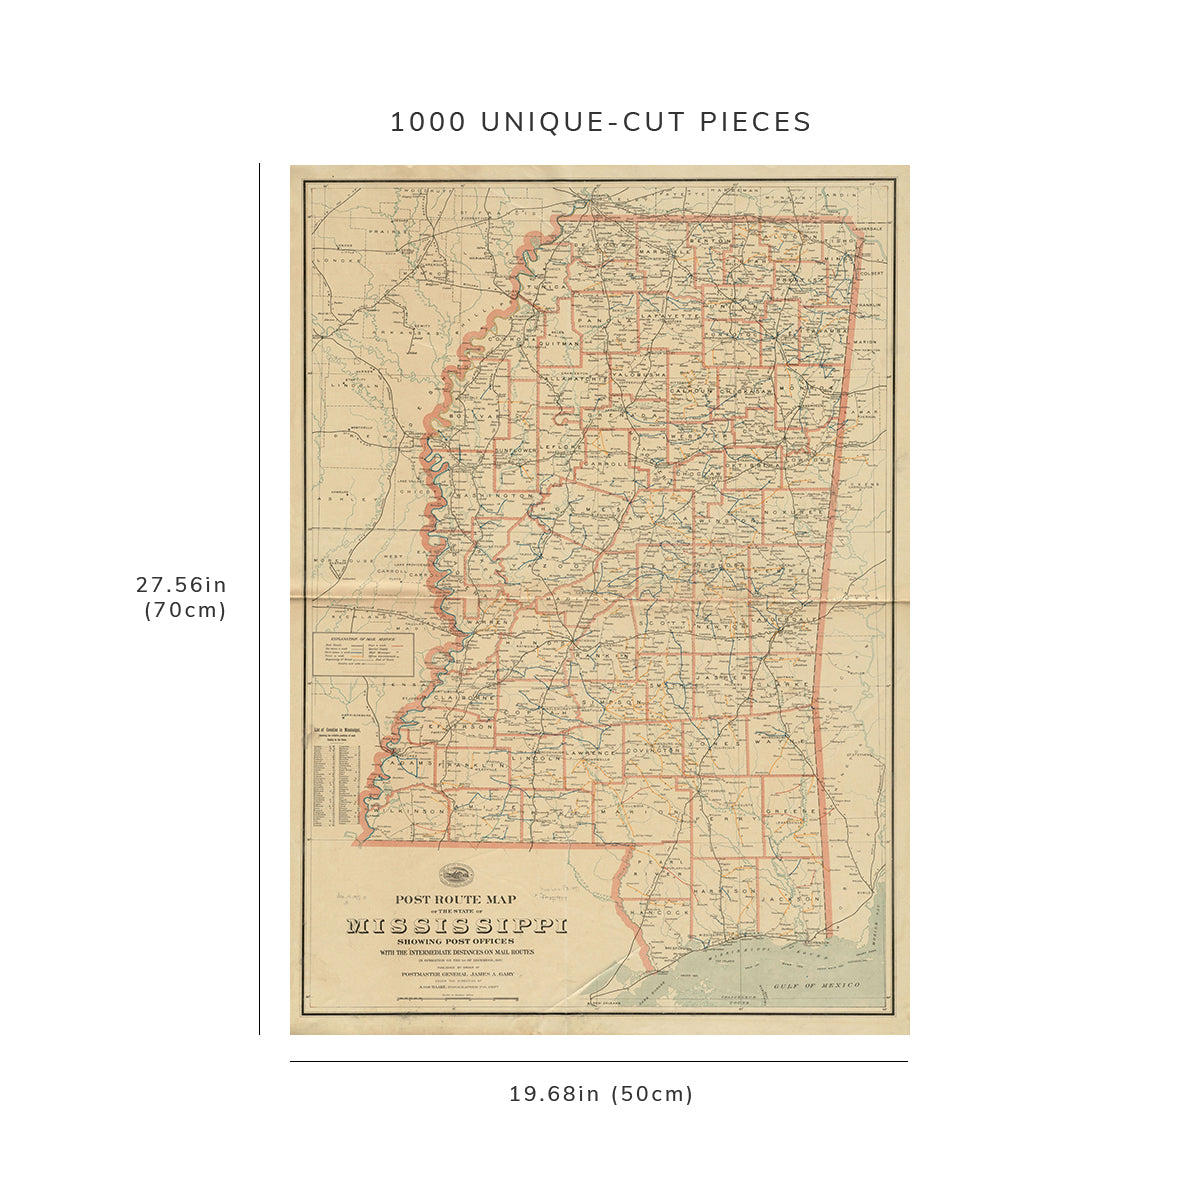 1000 Piece Jigsaw Puzzle: 1897 Map Mississippi Post route of the state of Mississippi